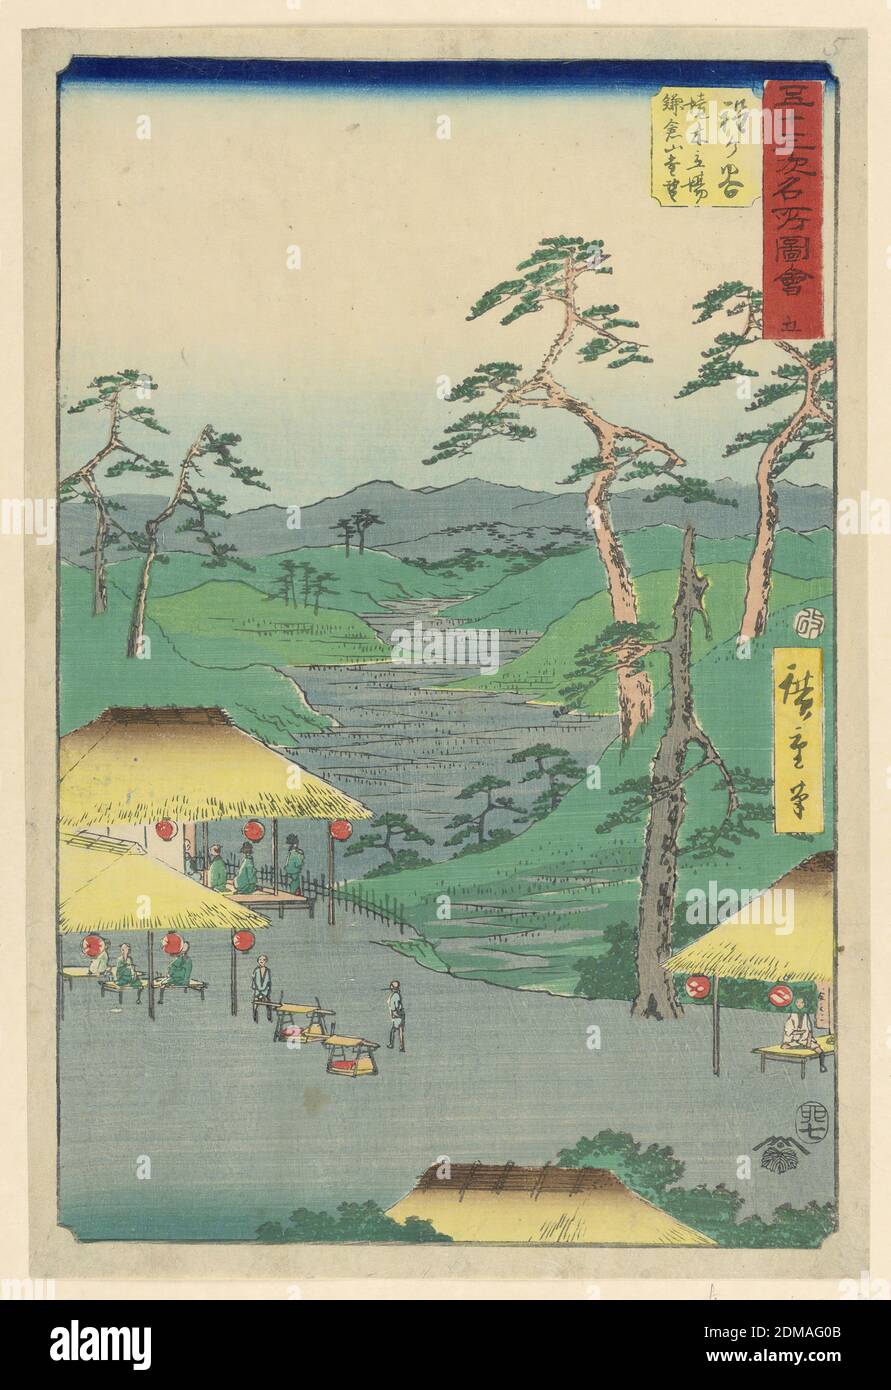 Valley View, Ando Hiroshige, Japanese, 1797–1858, Woodblock print in colored ink on paper, Hiroshige's eye-catching folded valley leads the viewer's eye to meander towards the front of the print. Here we see four partial huts are lit with lanterns. Beneath them, people are resting on benches or standing outside enjoying the day., Japan, 1797-1858, landscapes, Print Stock Photo